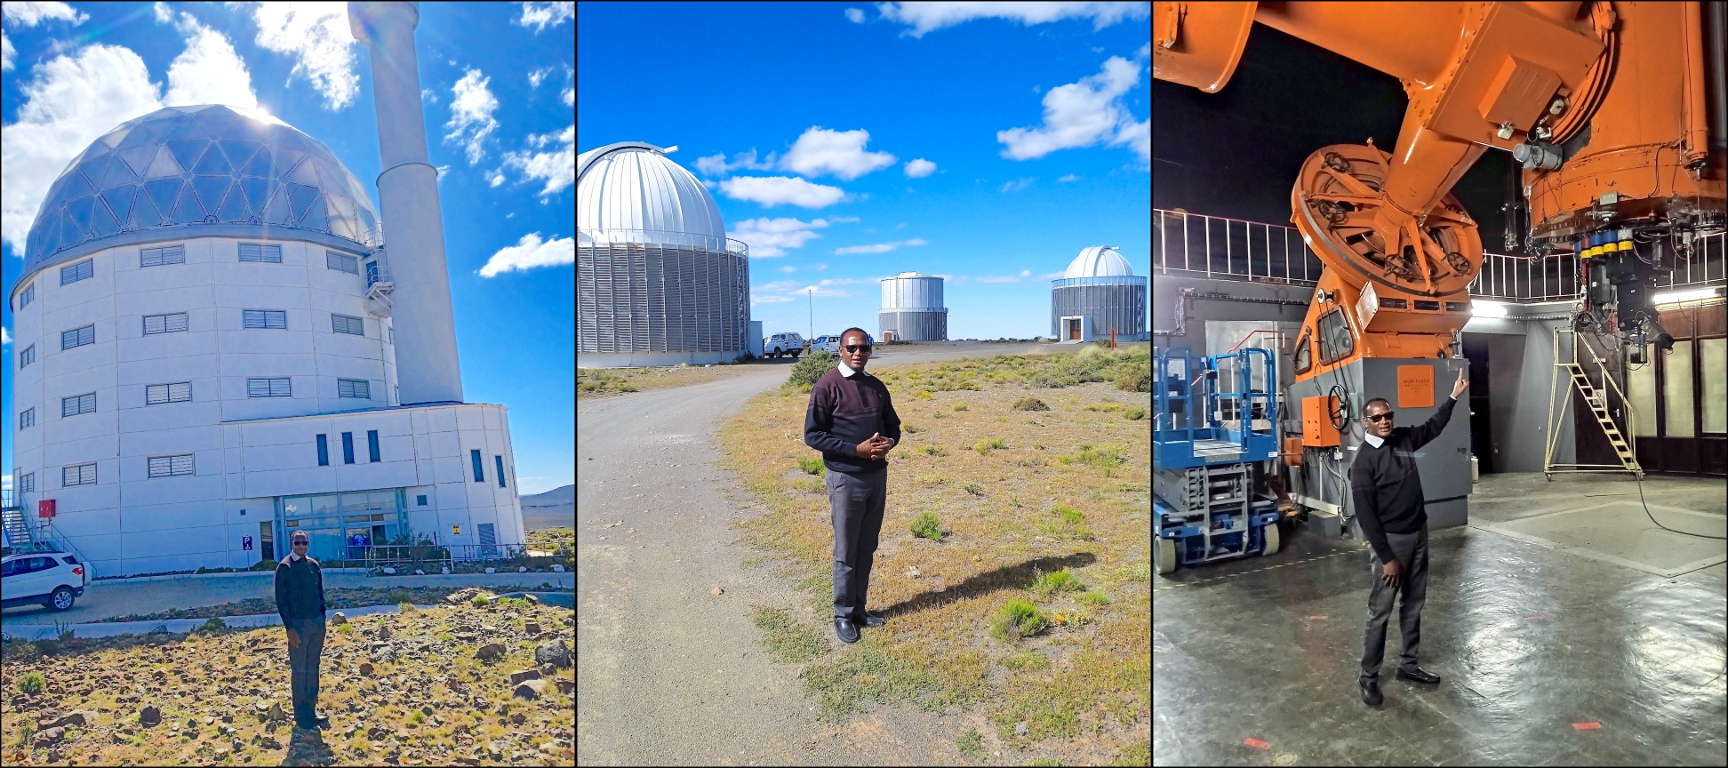 MMAO Director Elineema Nassari at the South African Astronomical Observatory